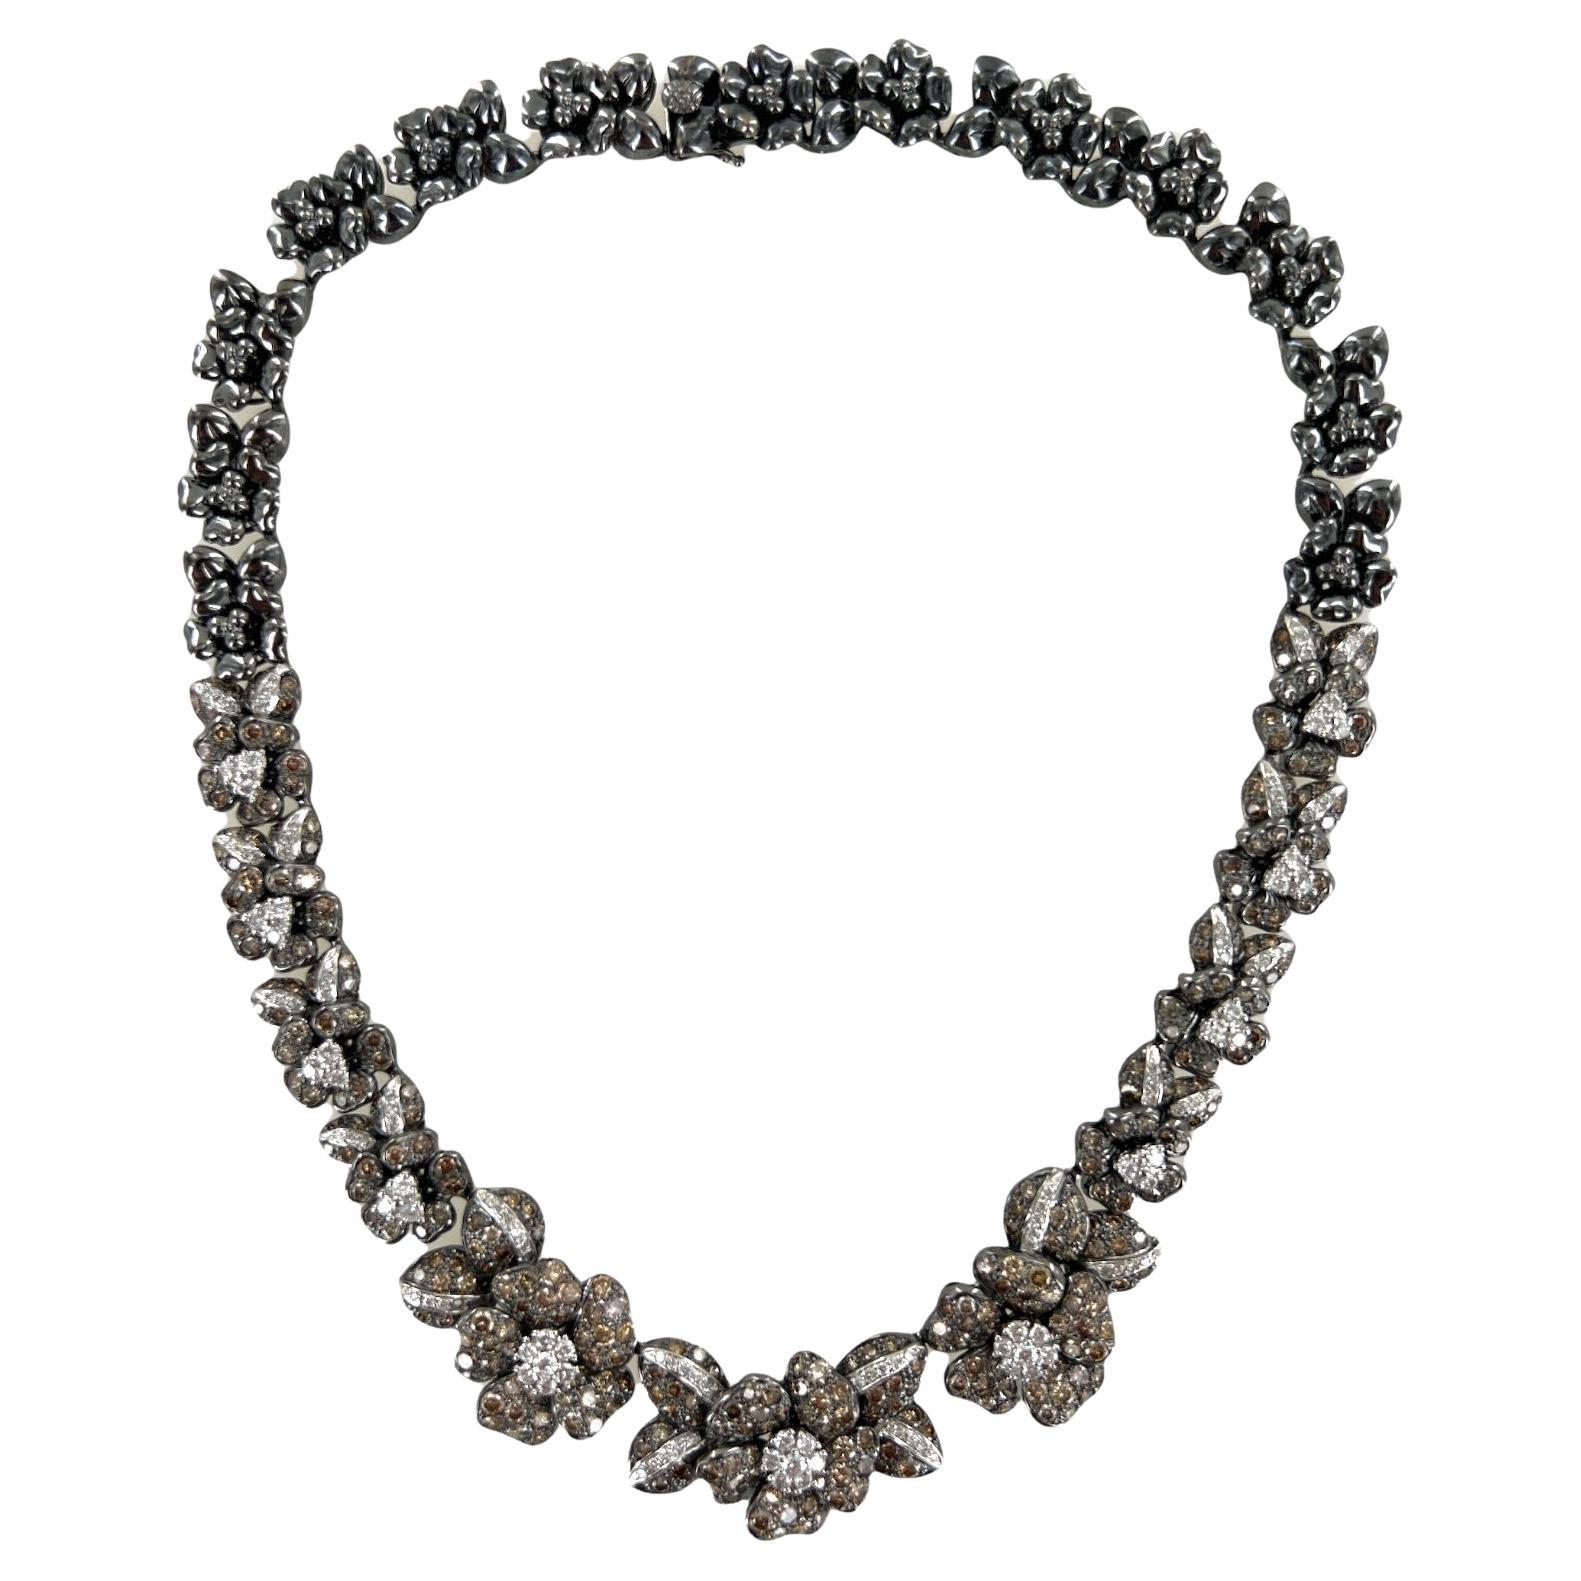 Beautifully crafted diamond floral necklace fashioned in 18 karat blackened gold. The necklace features 133 white round brilliant cut diamonds weighing approximately 4.00 carats and graded G-H color and VS2-SI1 clarity. The 328 champagne color